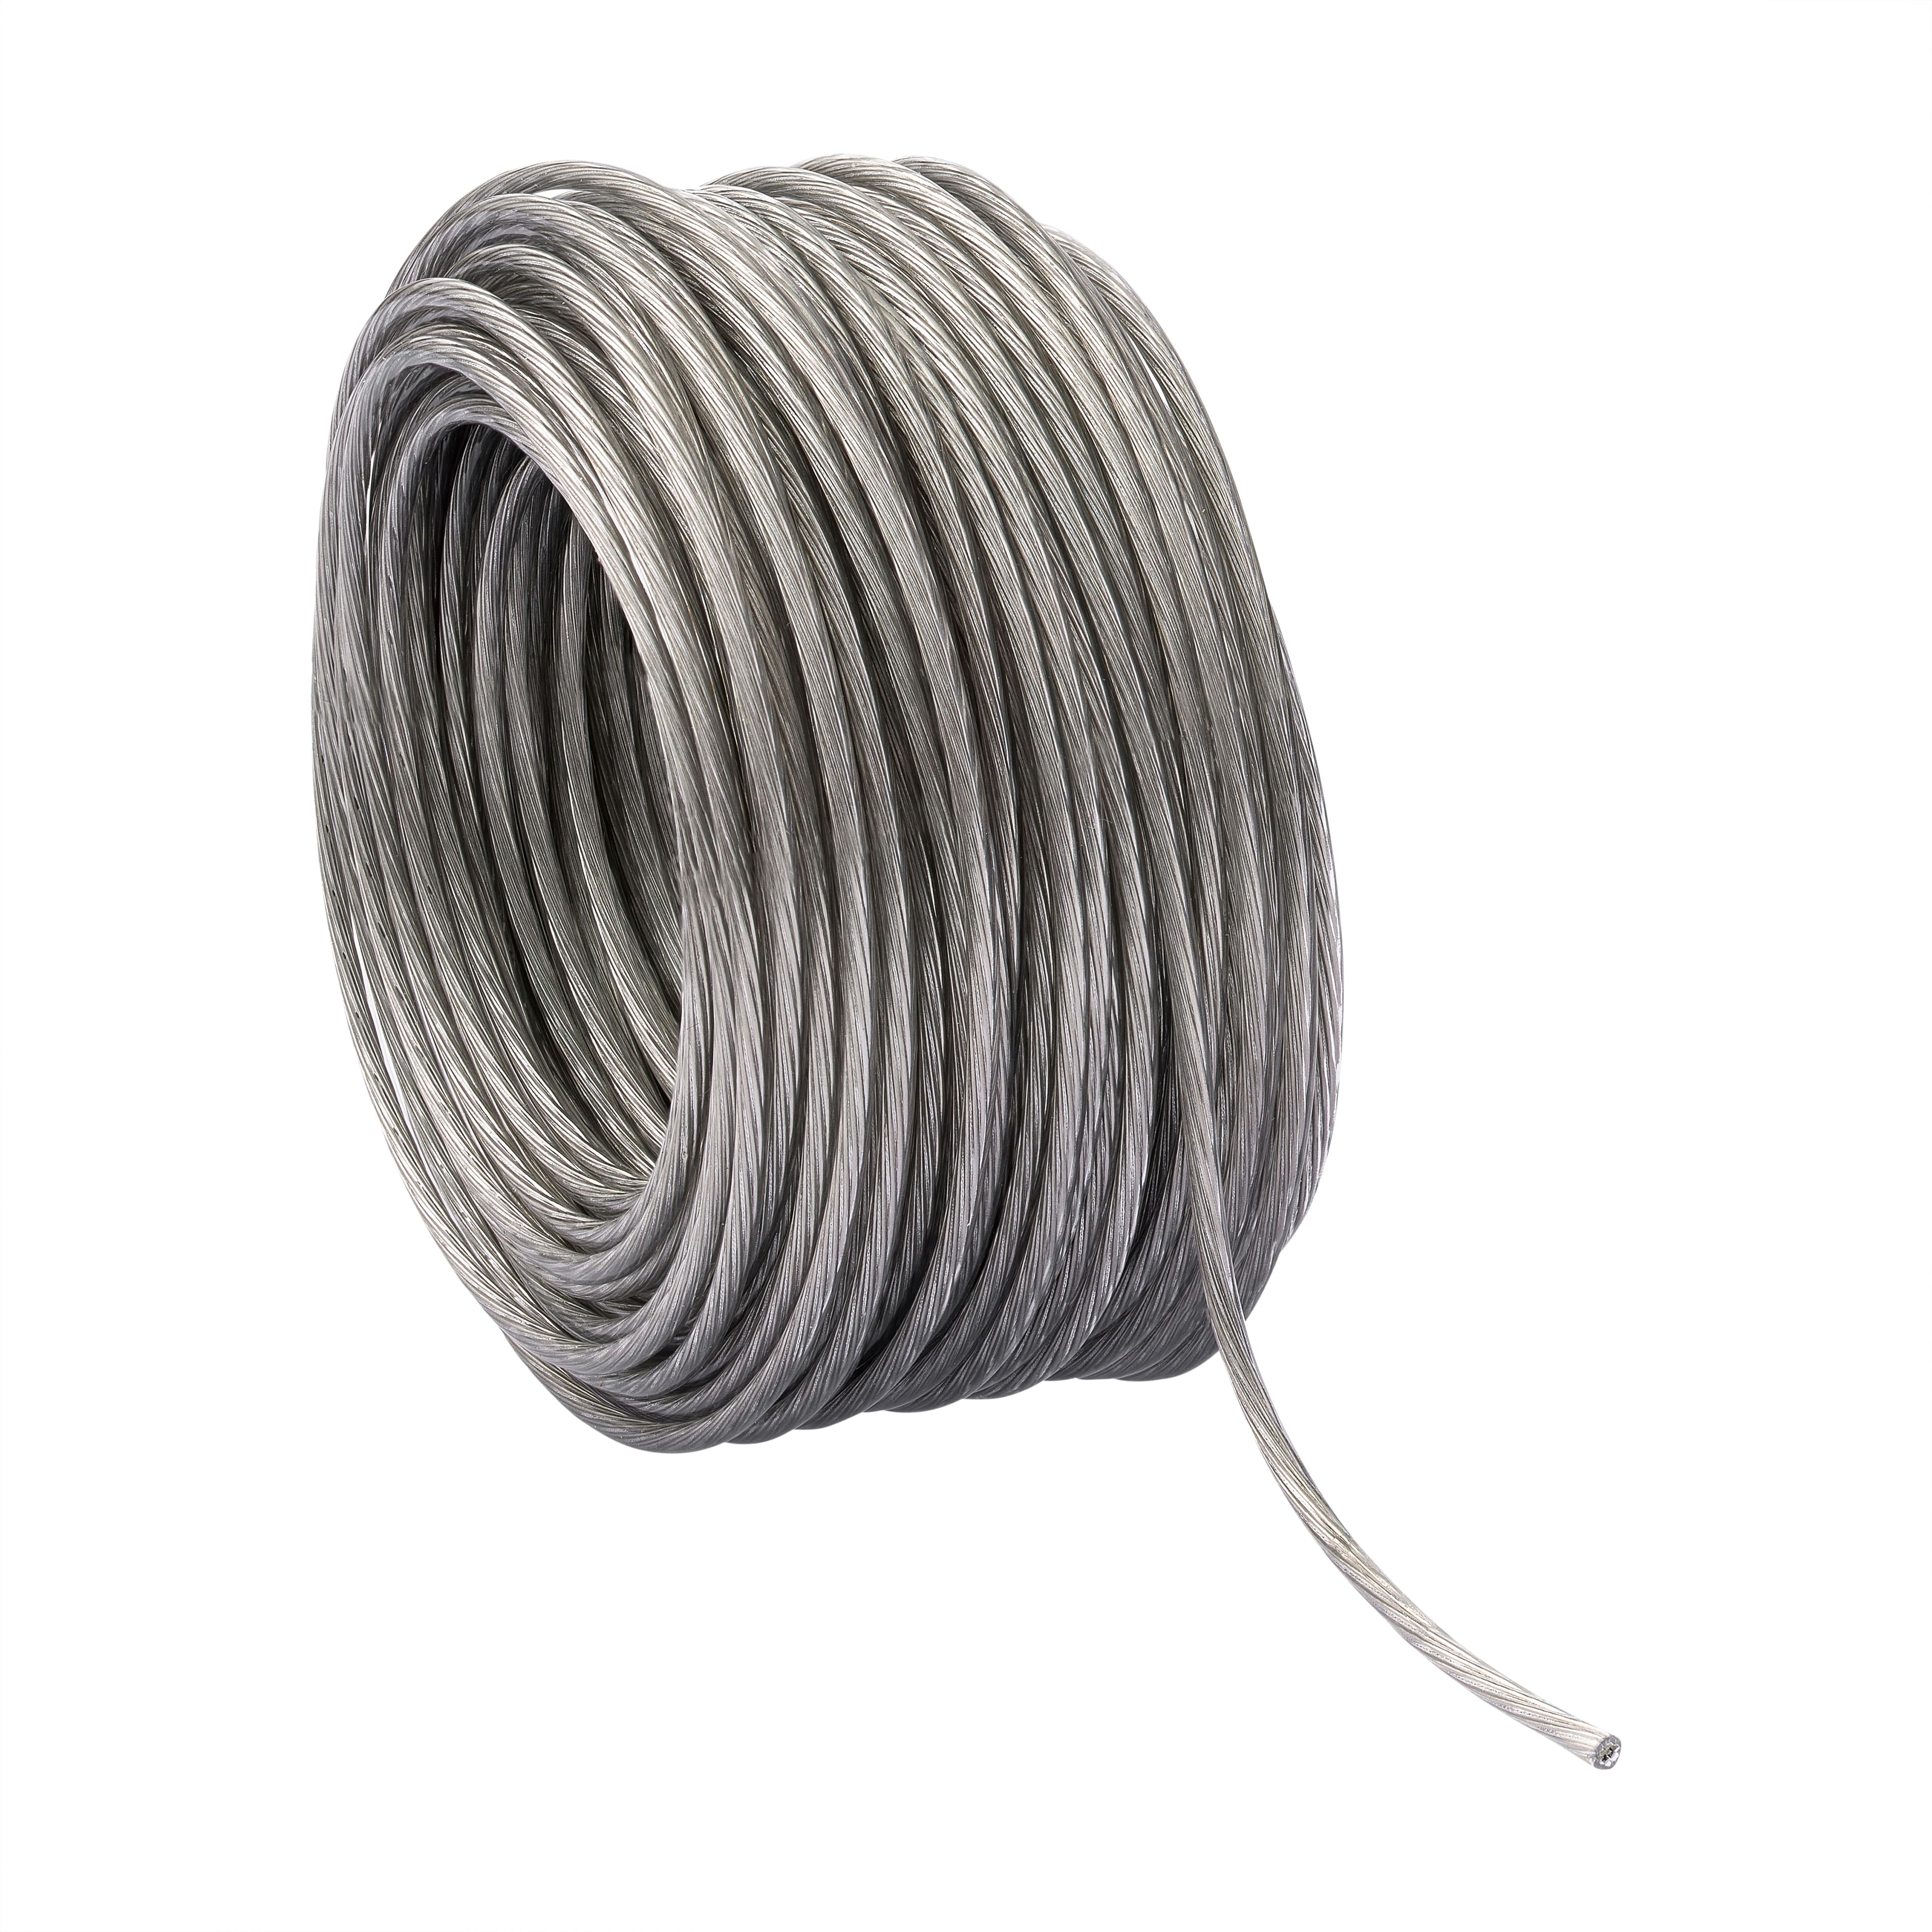 12 Pack: 50ft. Framers Wire by Studio D&#xE9;cor&#xAE;, 30lb.